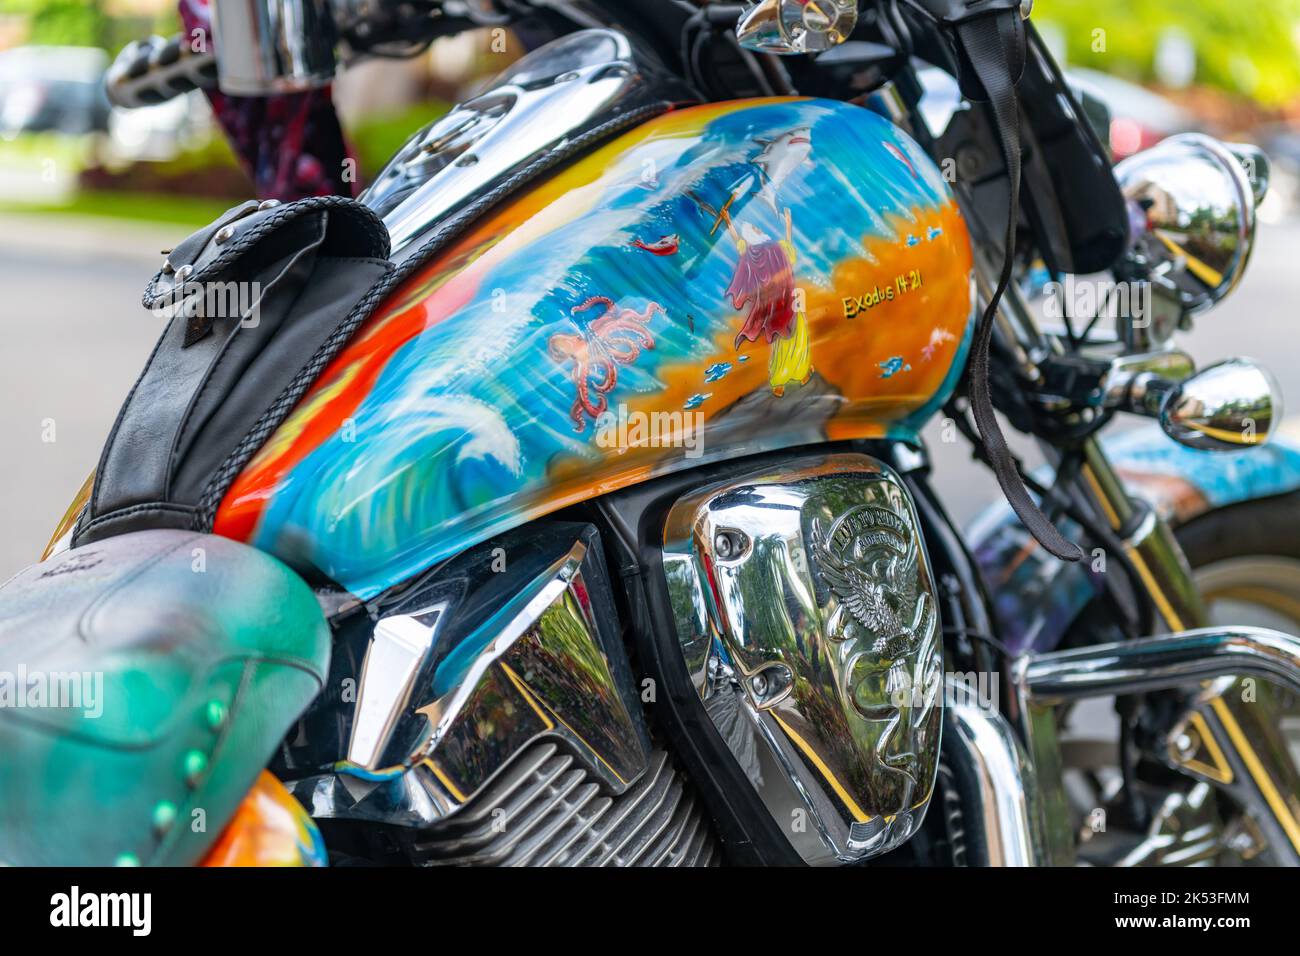 Motorcycle with Christian messages, Florida, USA Stock Photo